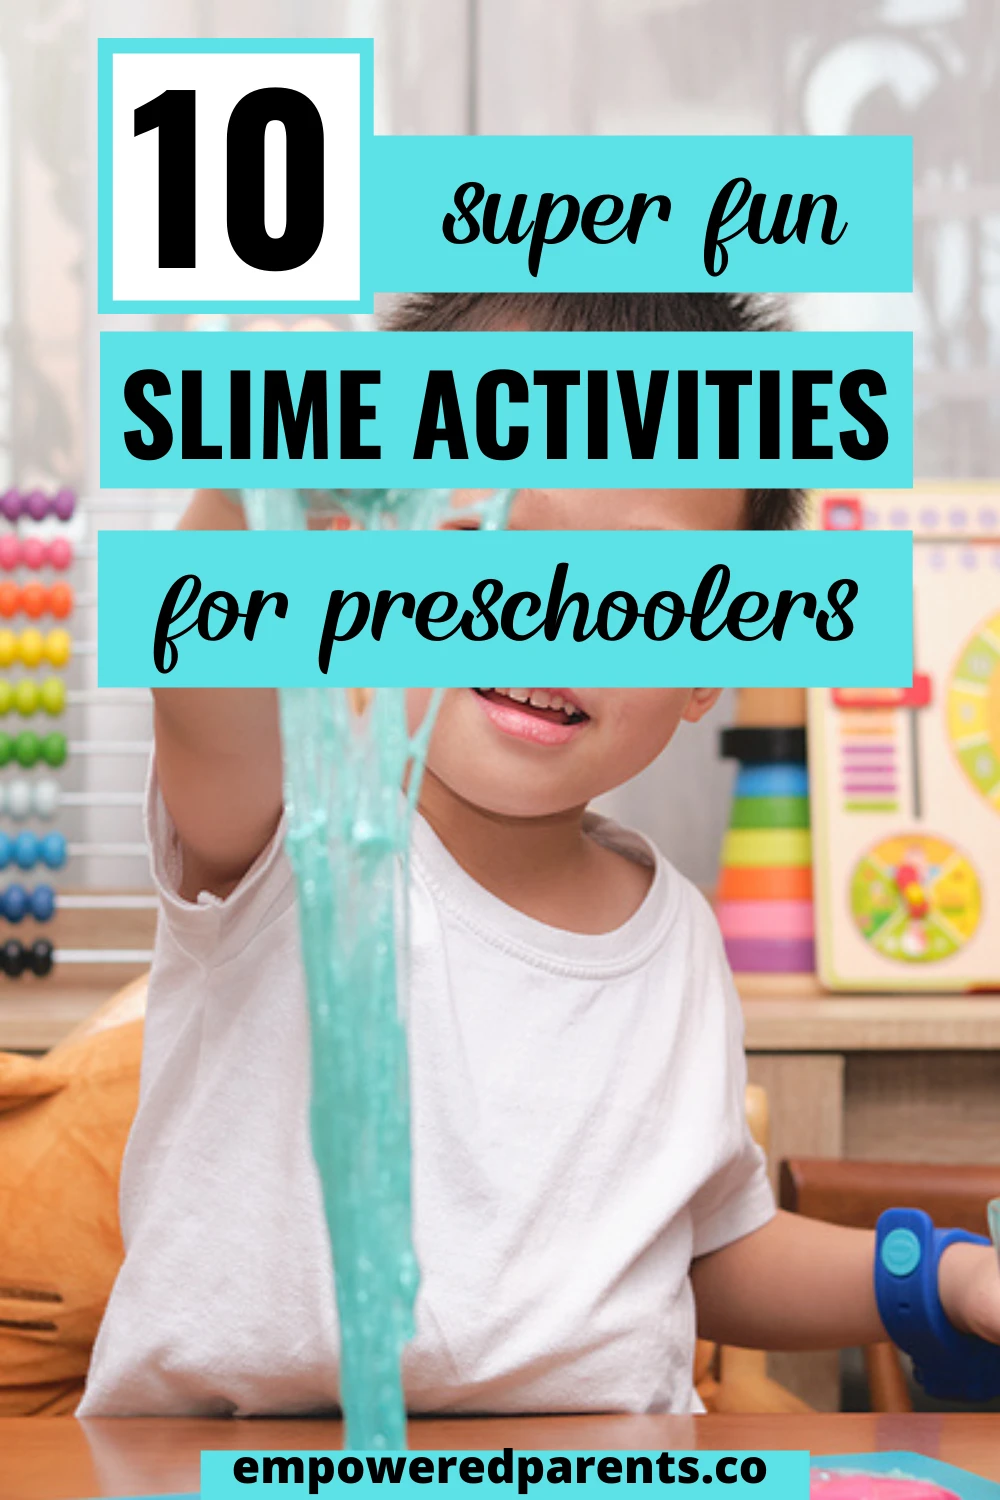 Child playing with slime. Text reads "10 super fun slime activities for preschoolers".